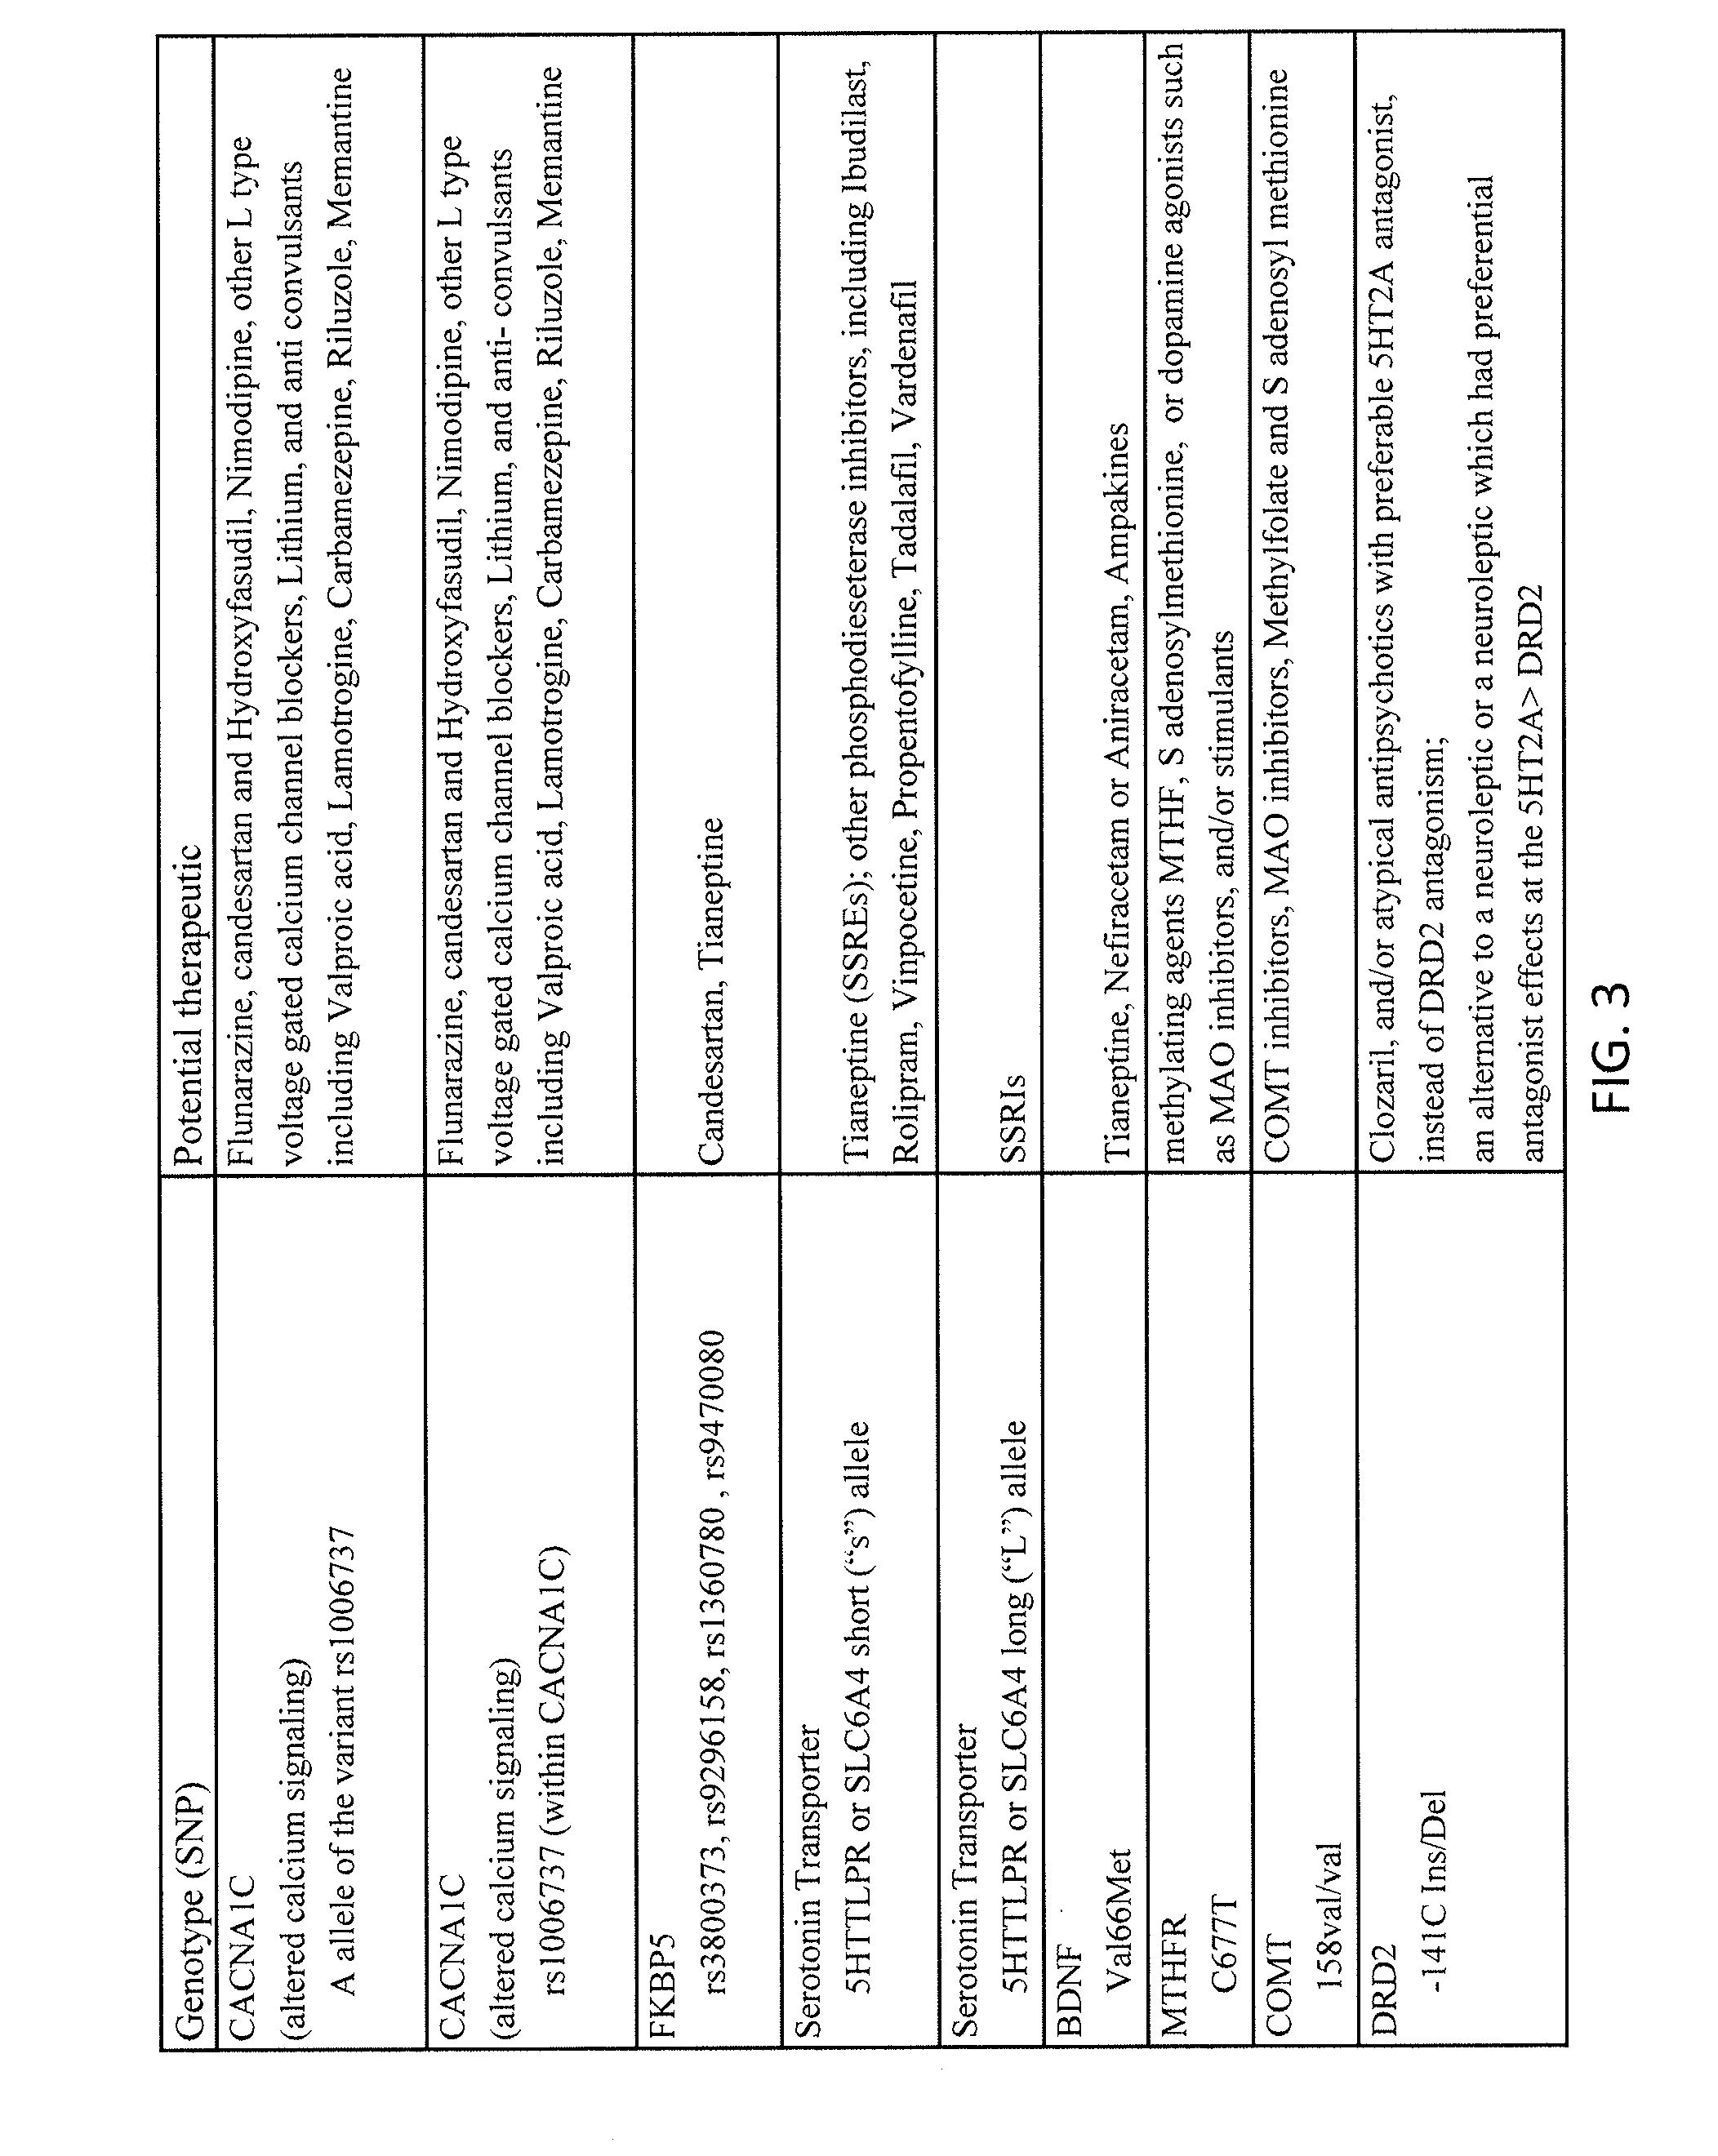 Methods for assessment and treatment of mood disorders via single nucleotide polymorphisms analysis